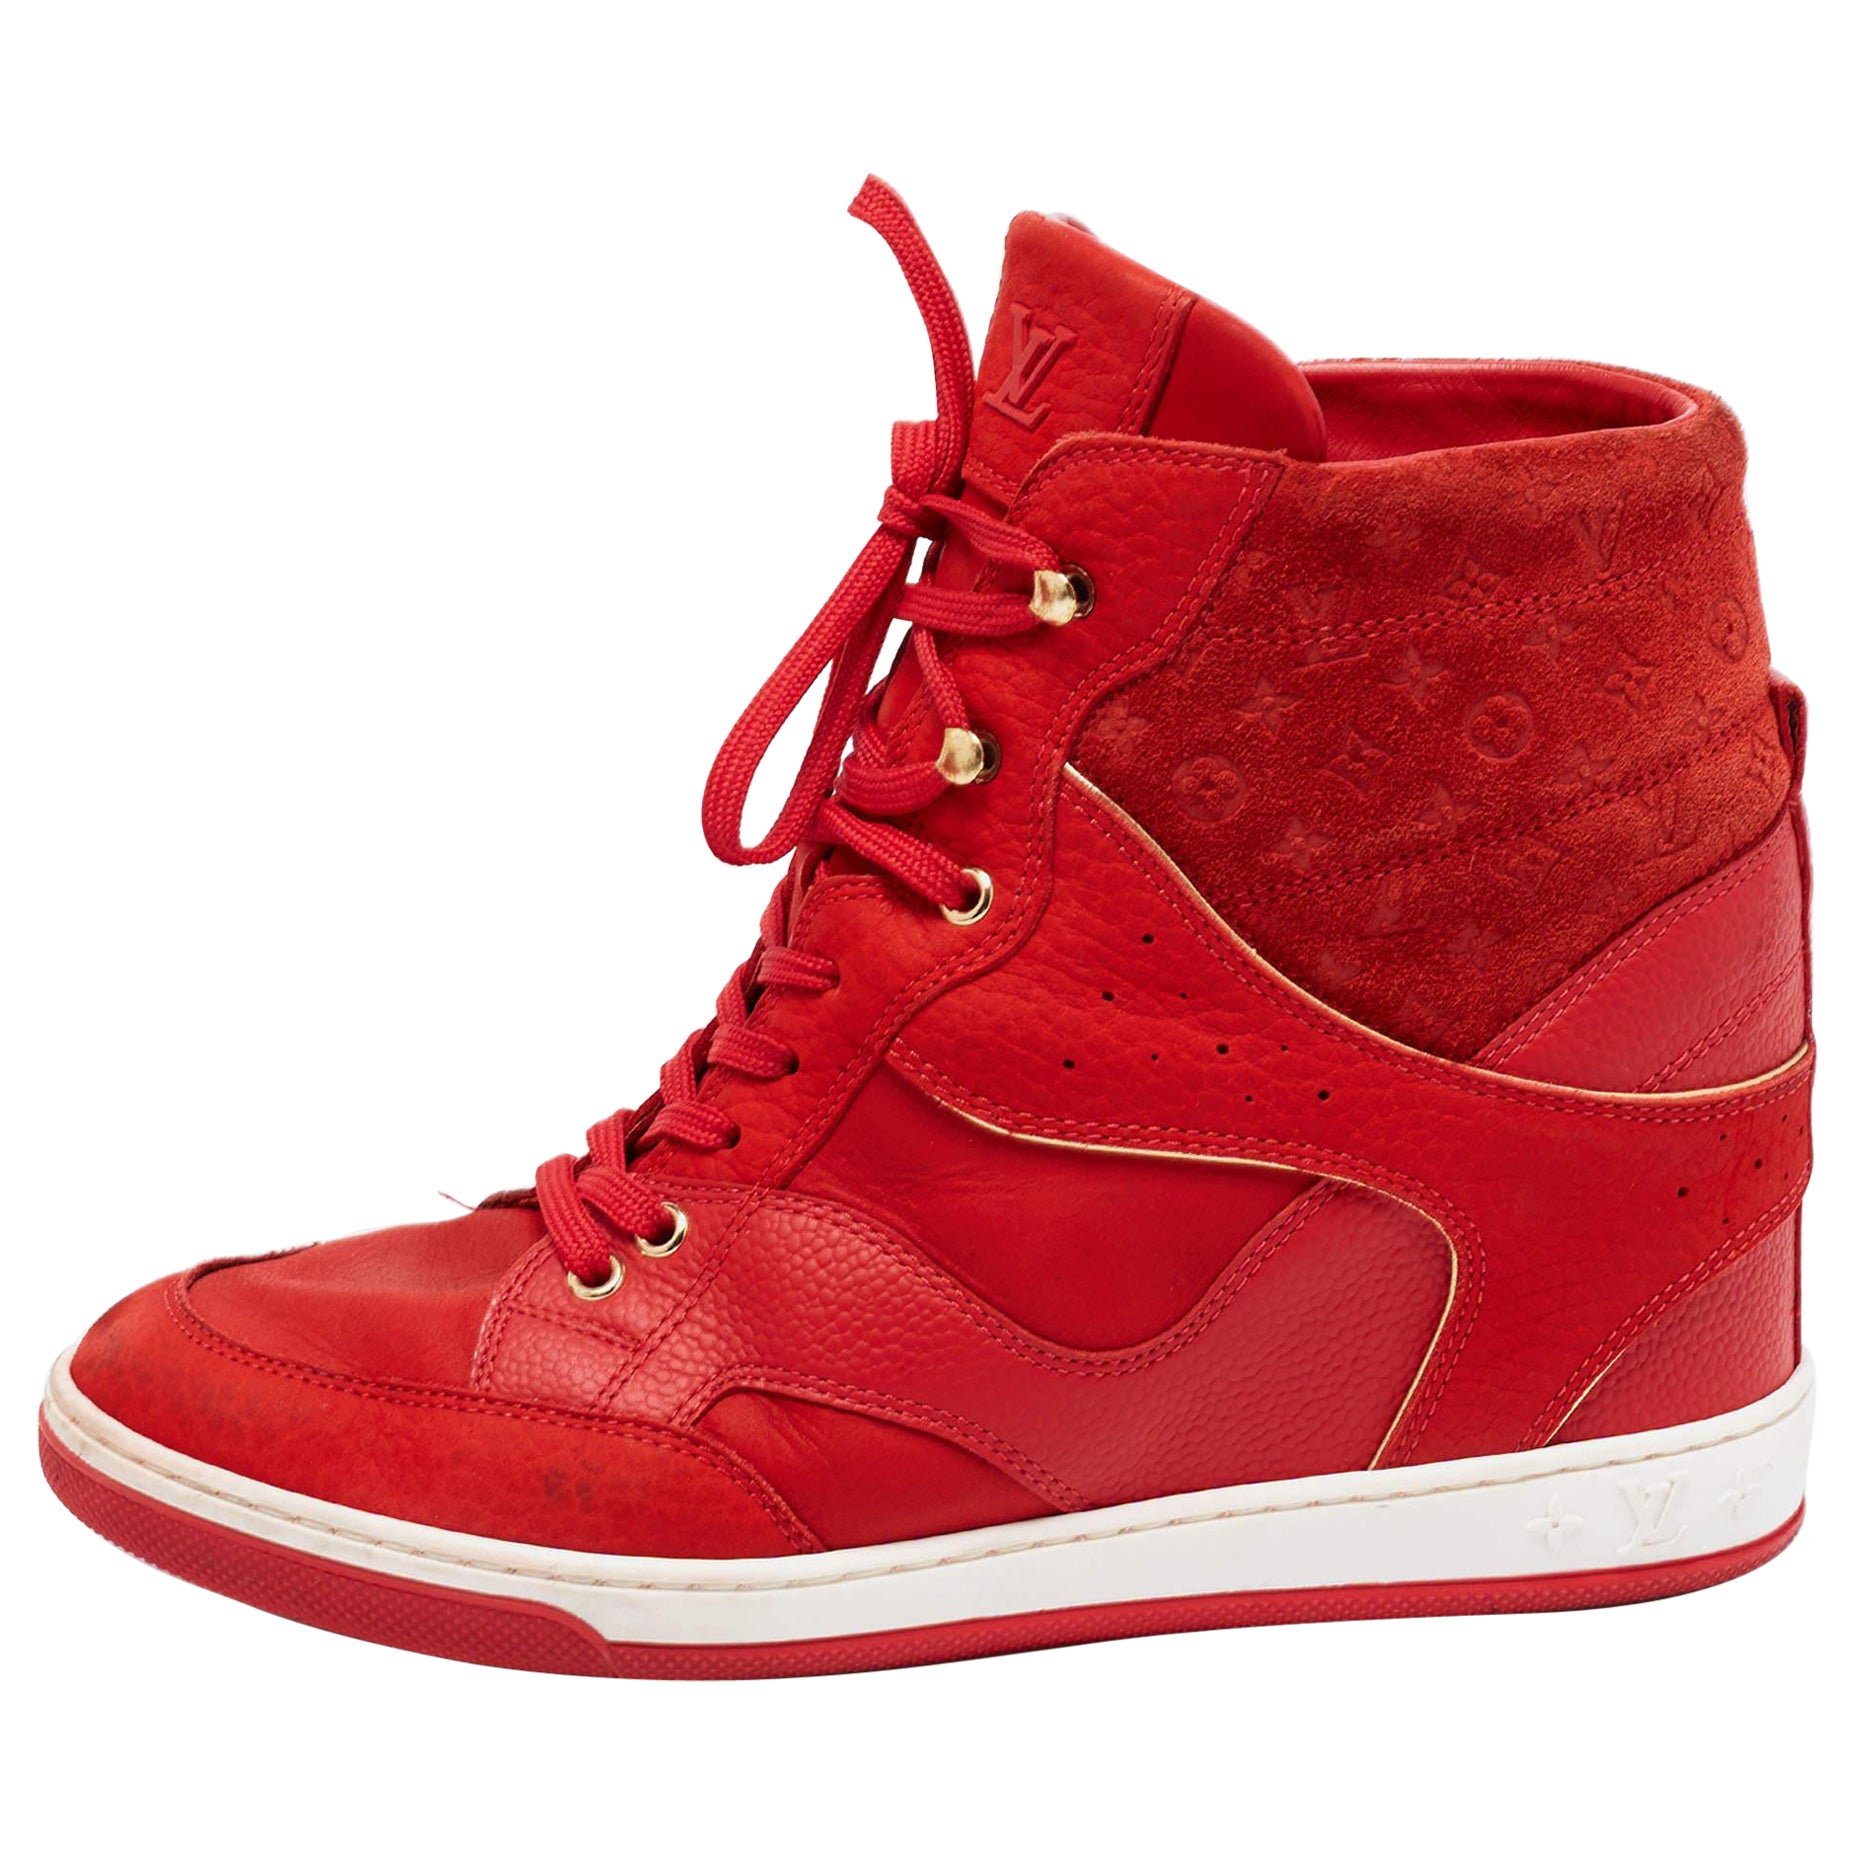 Louis Vuitton Red Leather And Embossed Monogram Suede Millenium Wedge Sneakers S For Sale